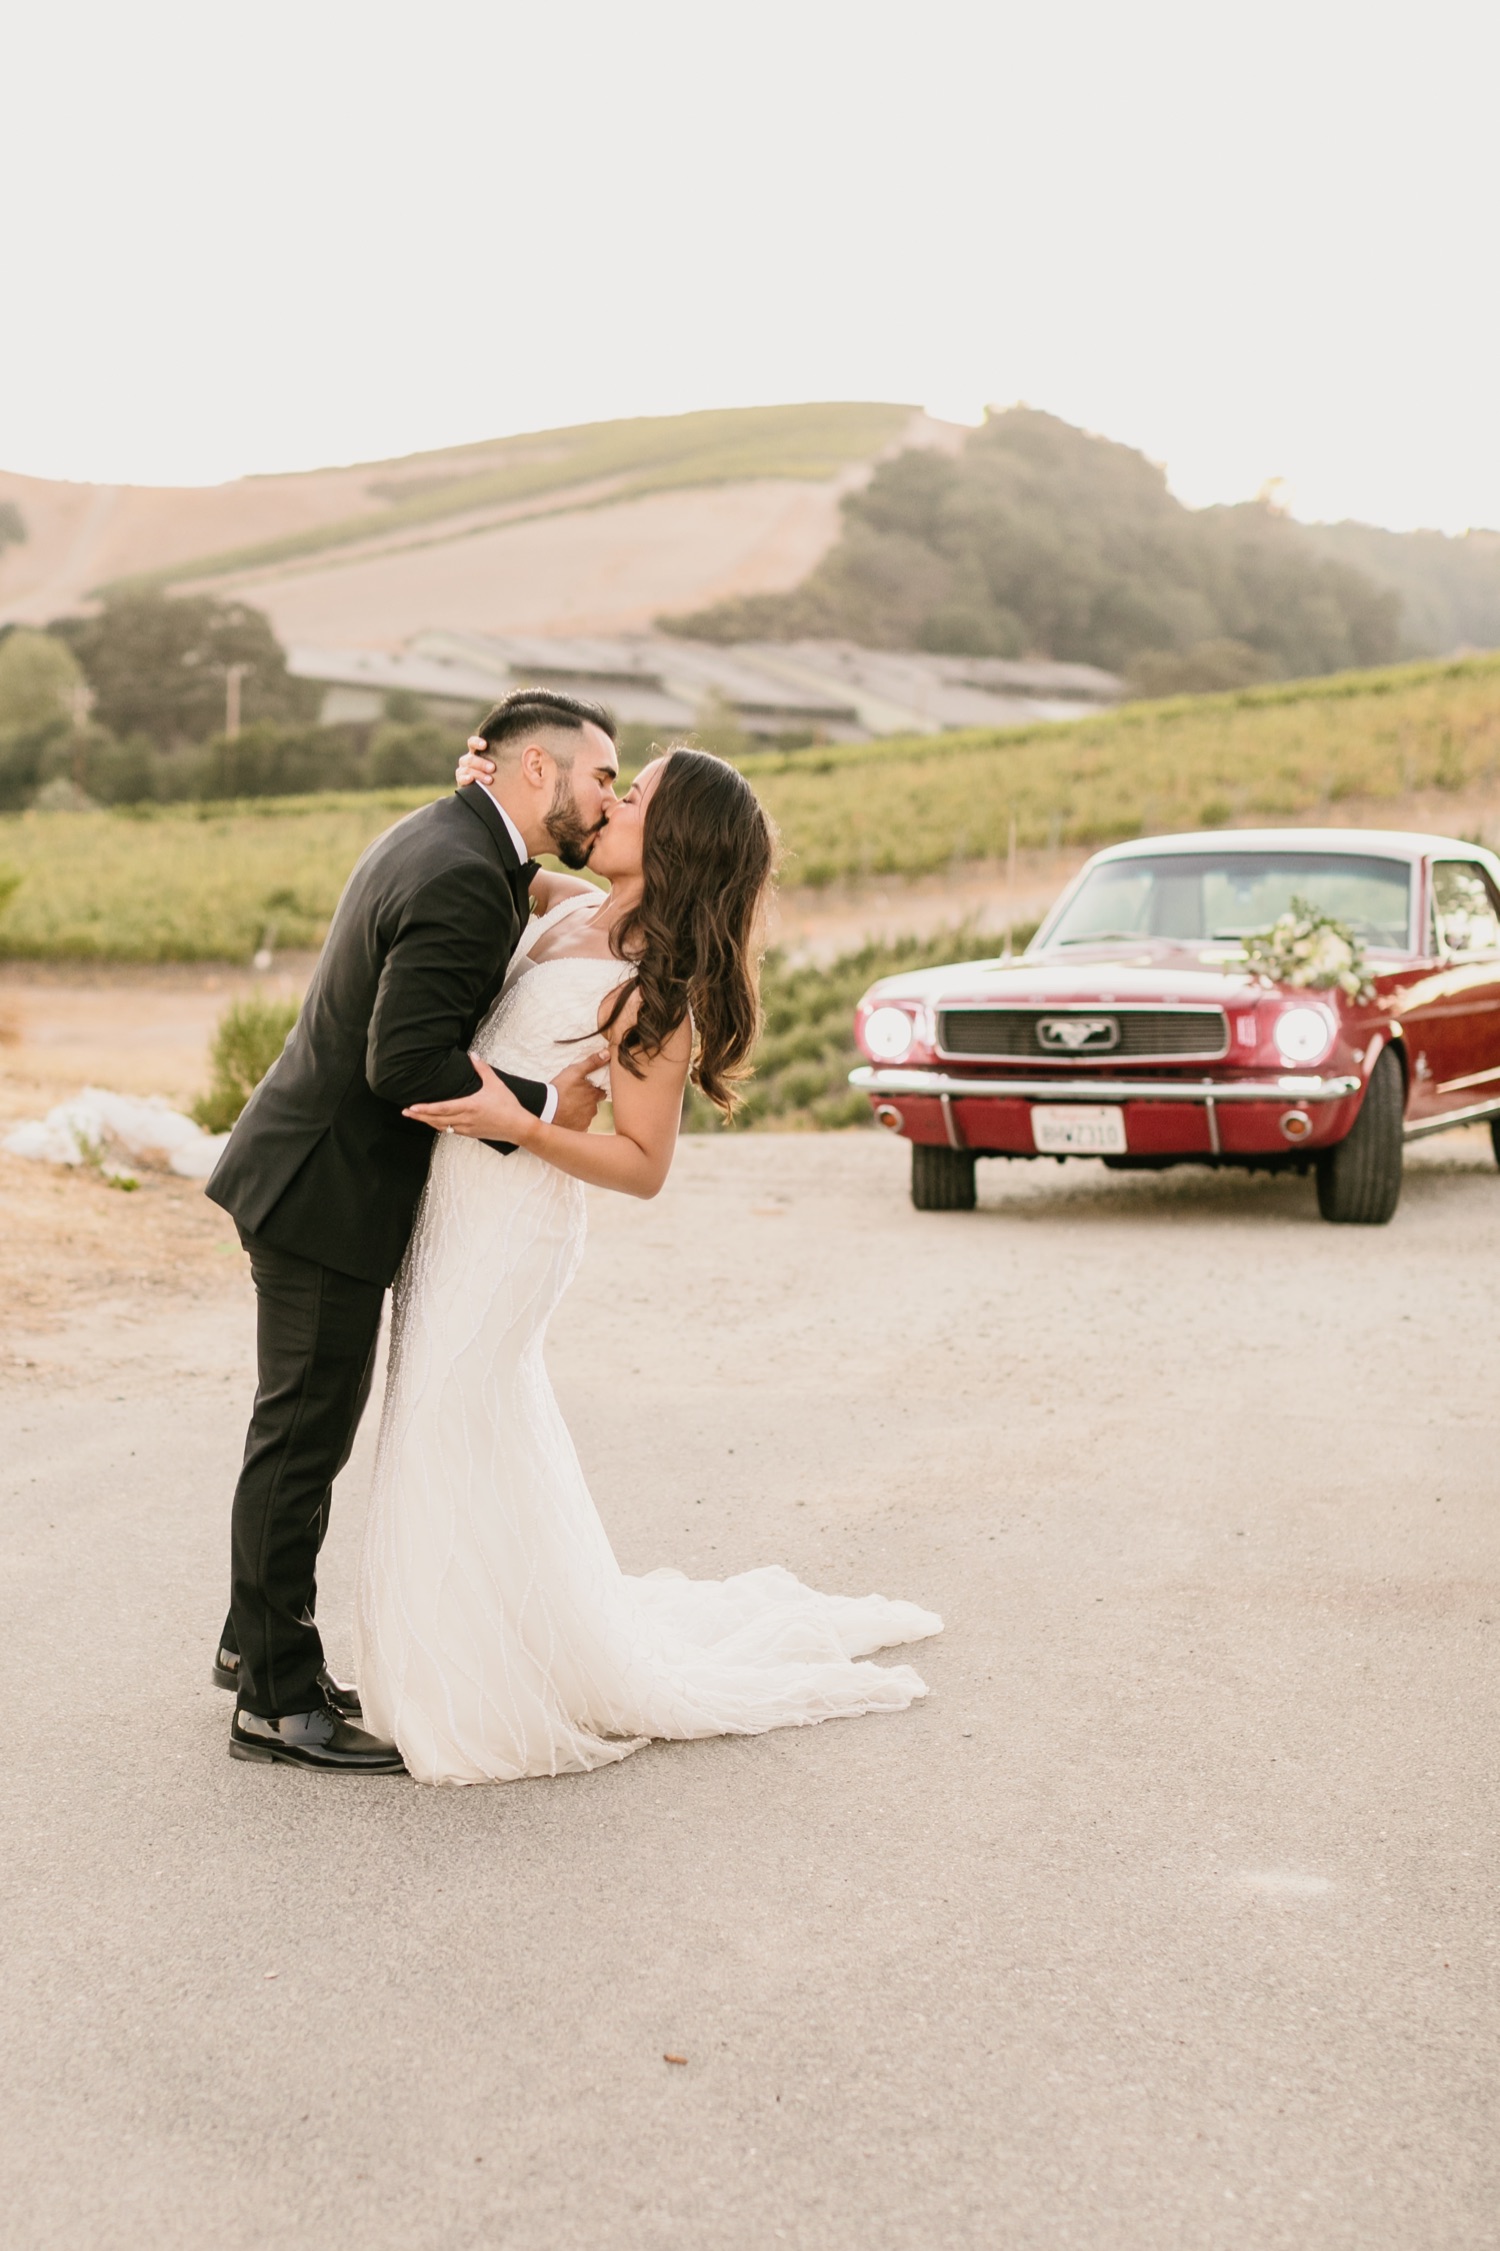 Bride and groom kiss in front of classic red car at tooth and nail winery